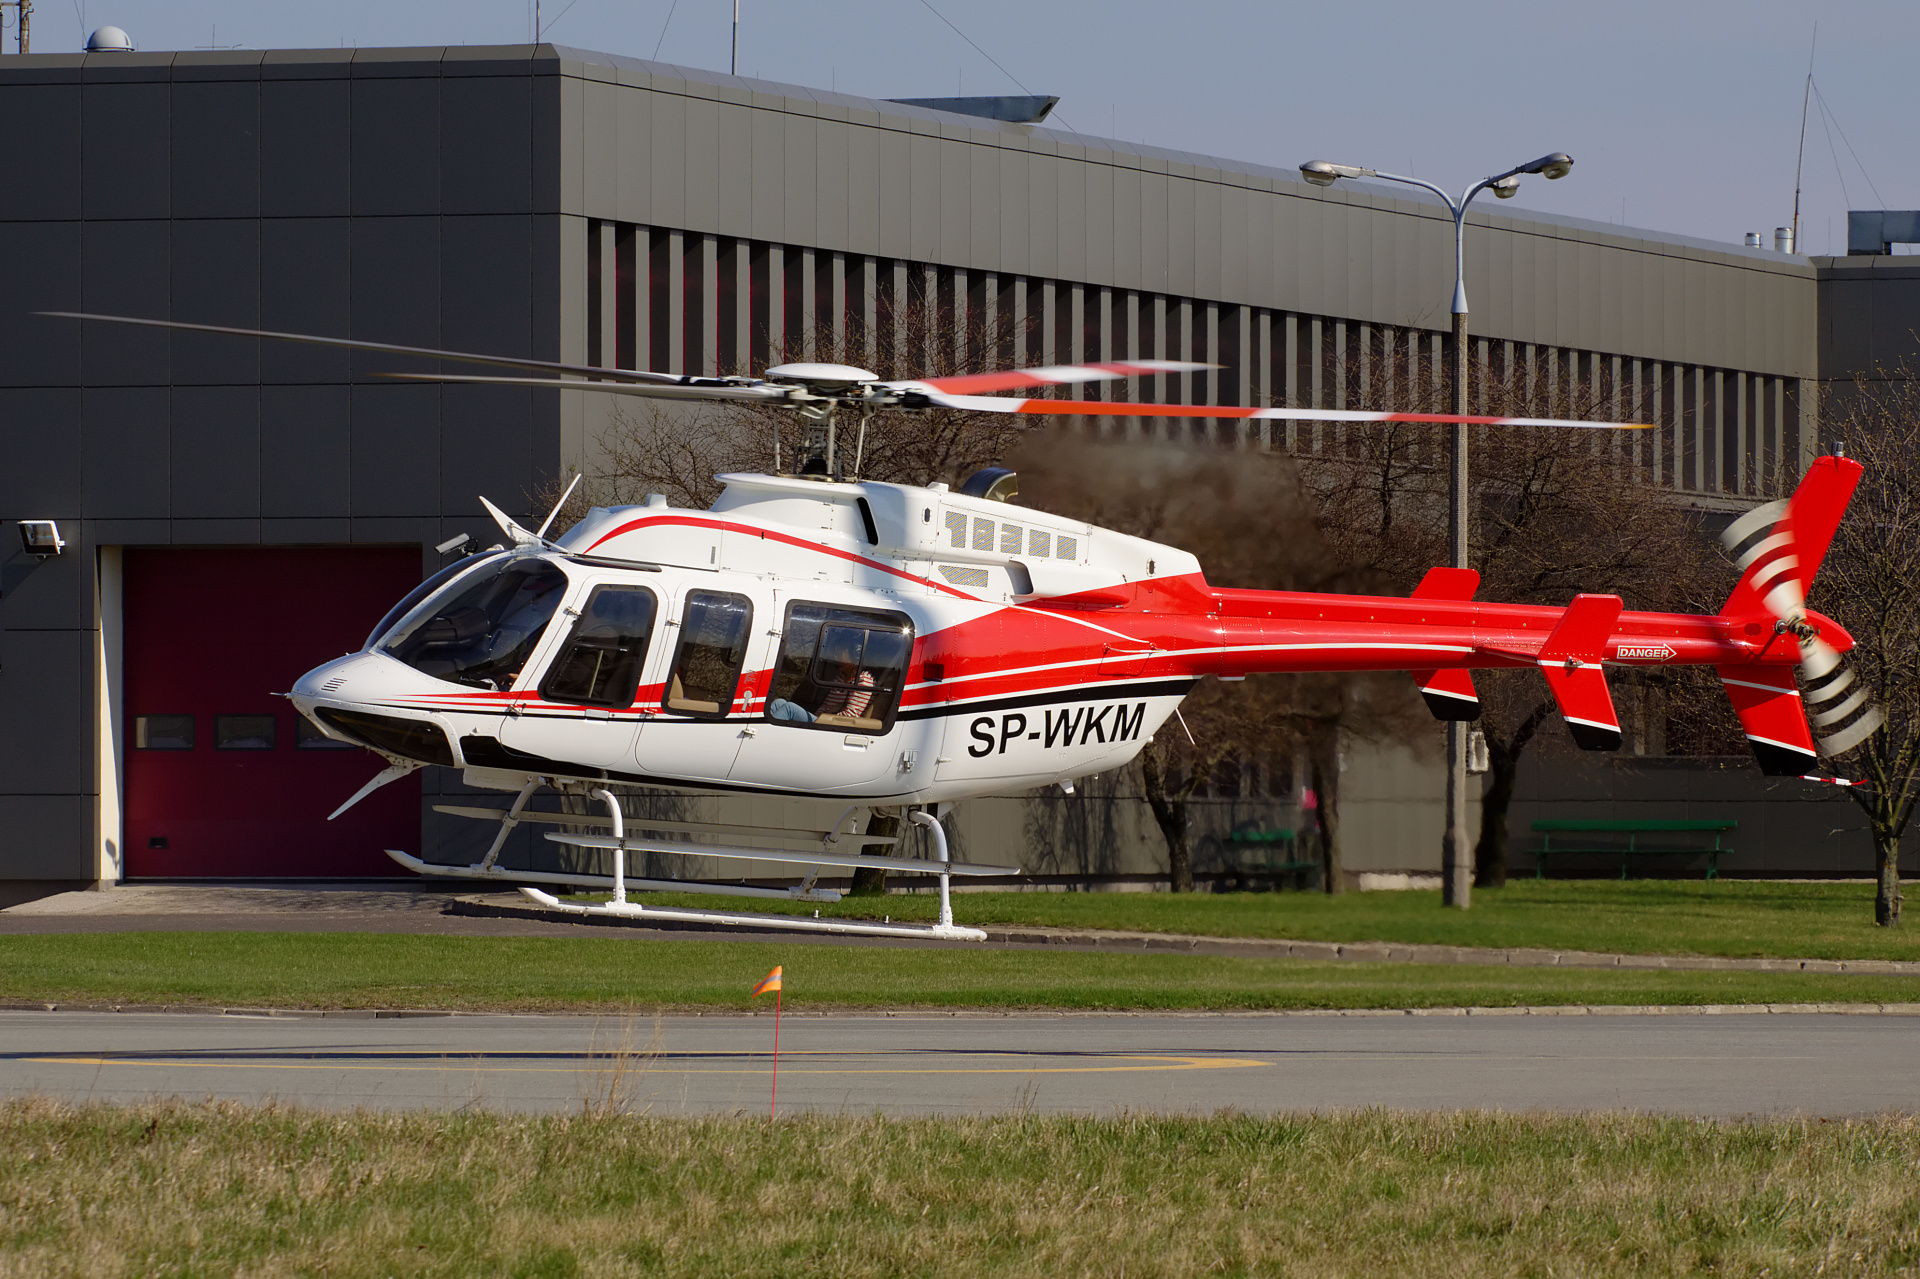 Bell 407GX, SP-WKM, private (Aircraft » EPWA Spotting » Bell 407)